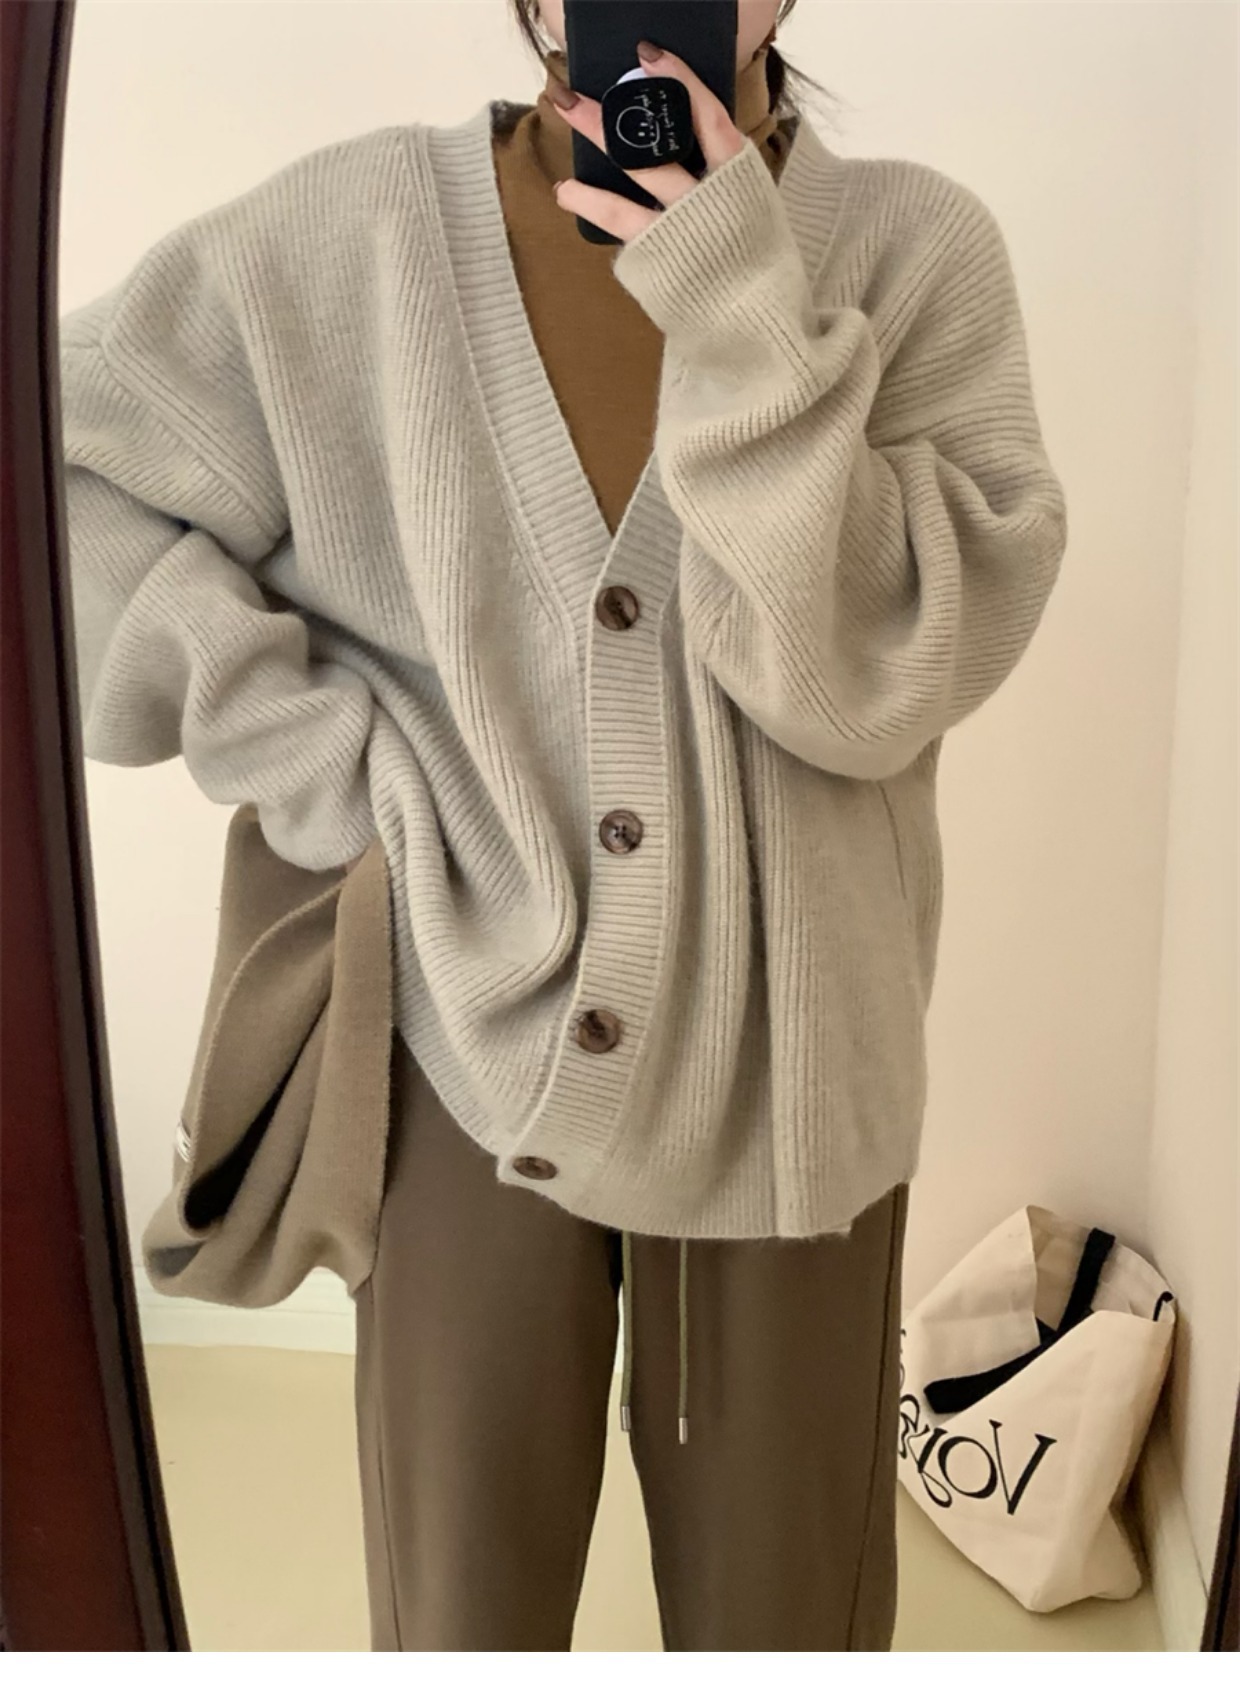 Solid color simple casual sweater jacket